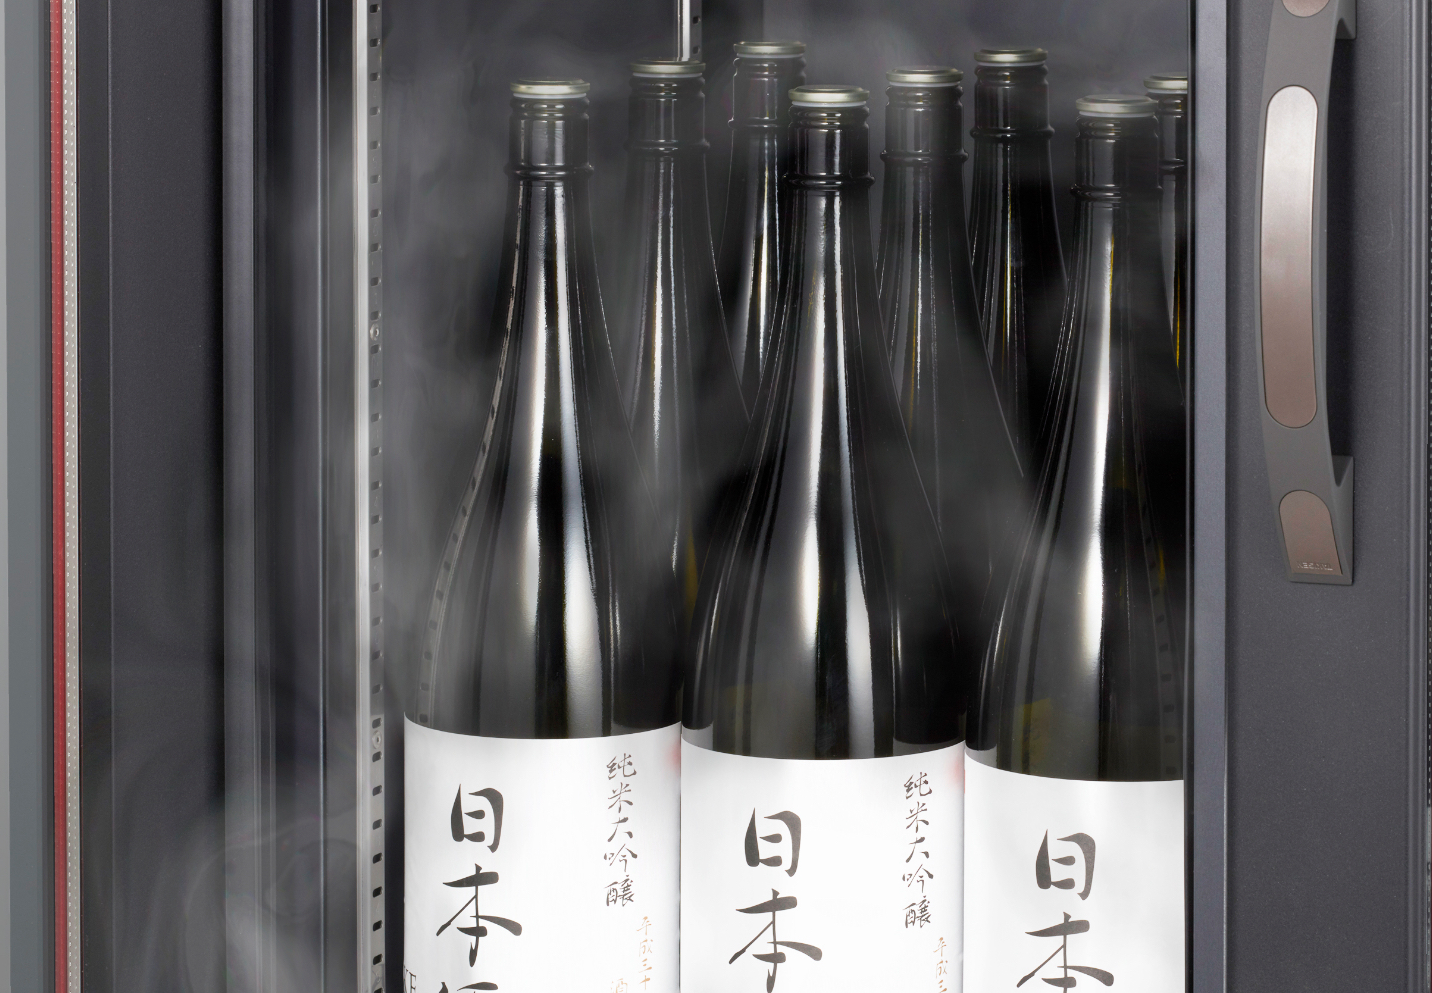 How can I properly store sake?